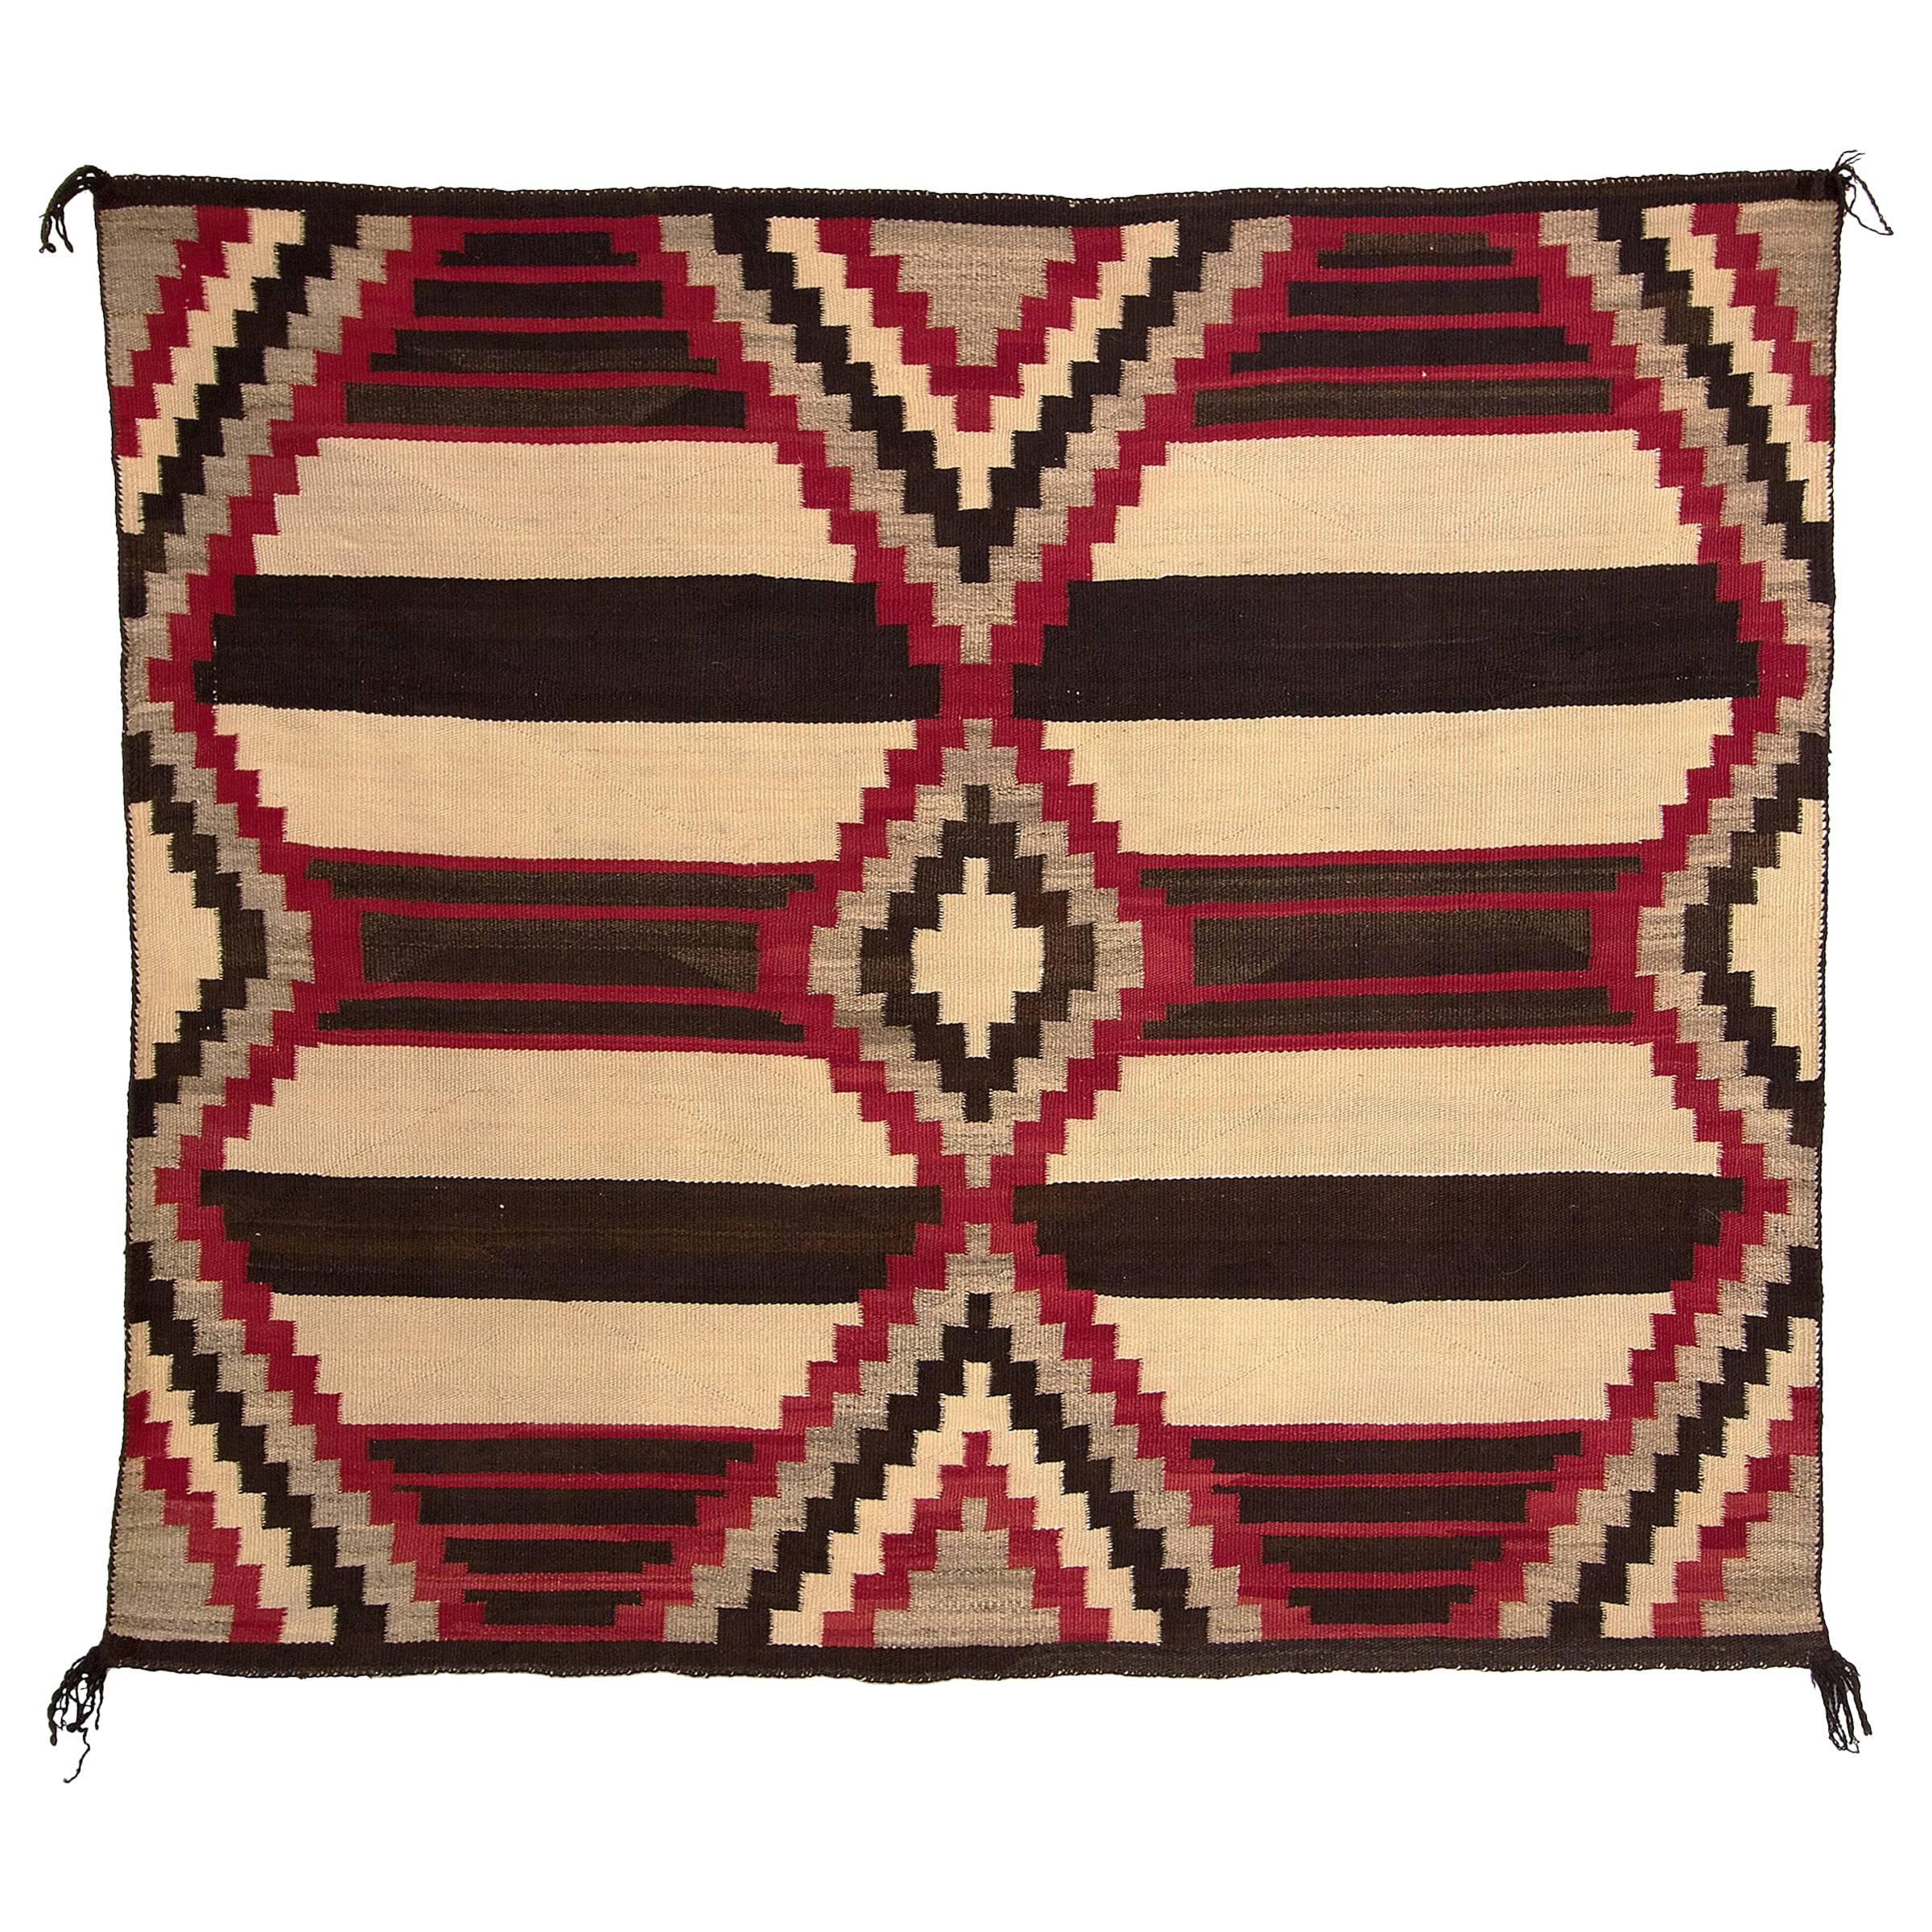 Vintage Navajo Chiefs Blanket '4th Phase Variant', Early 20th Century